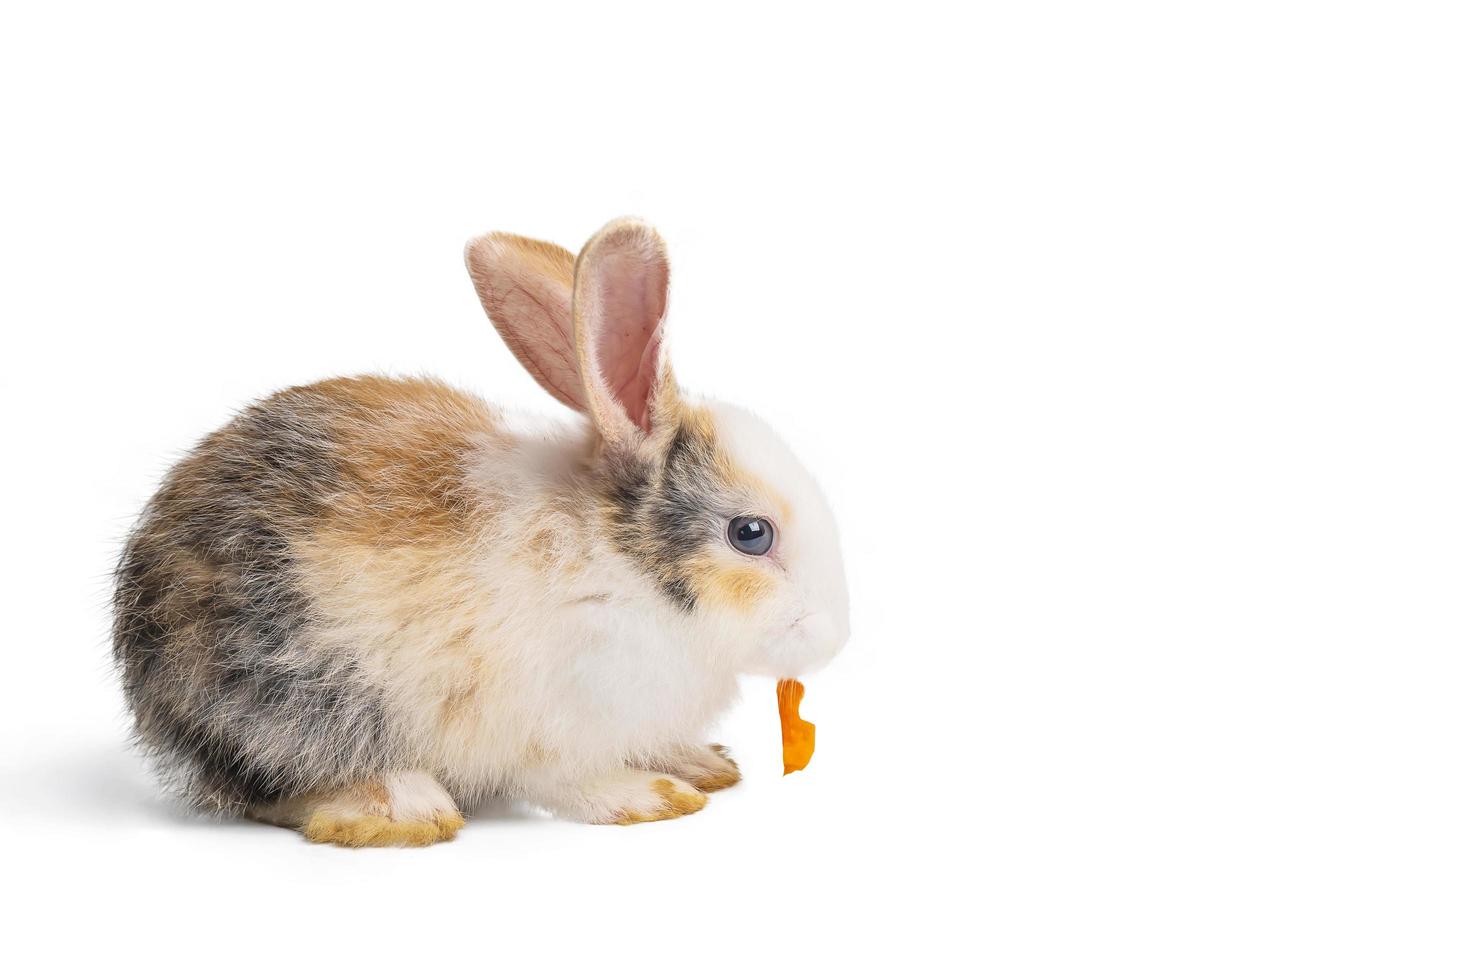 Little brown and white rabbit eating carrot on isolated white background with clipping path. It's small mammals in the family Leporidae of the order Lagomorpha. photo